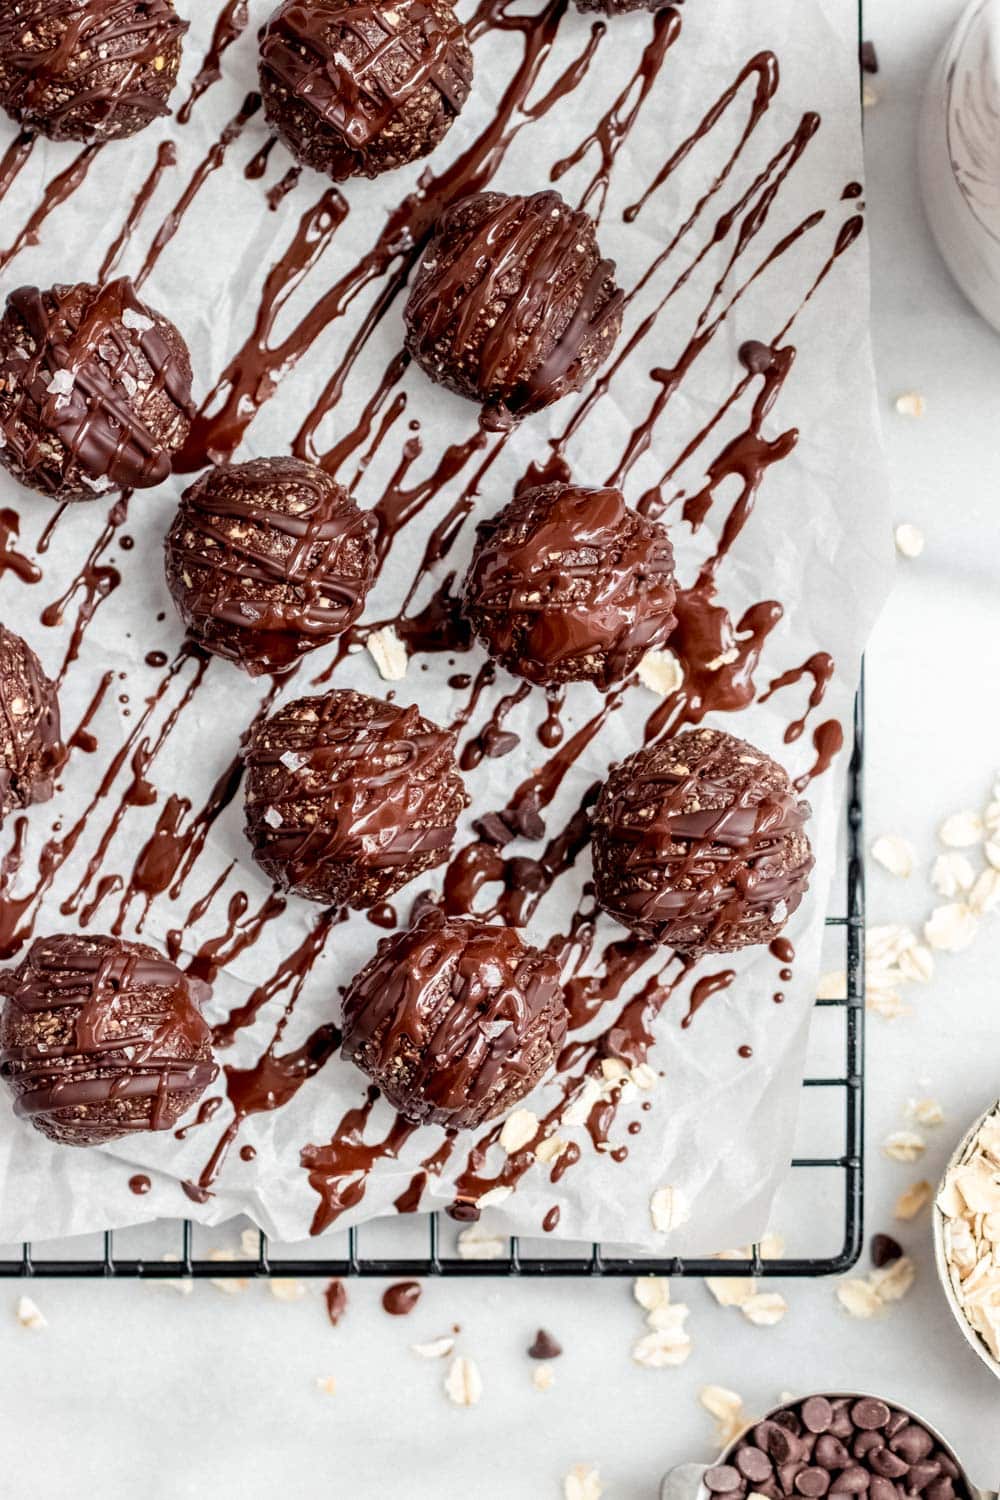 Chocolate bliss balls drizzled with chocolate sauce.